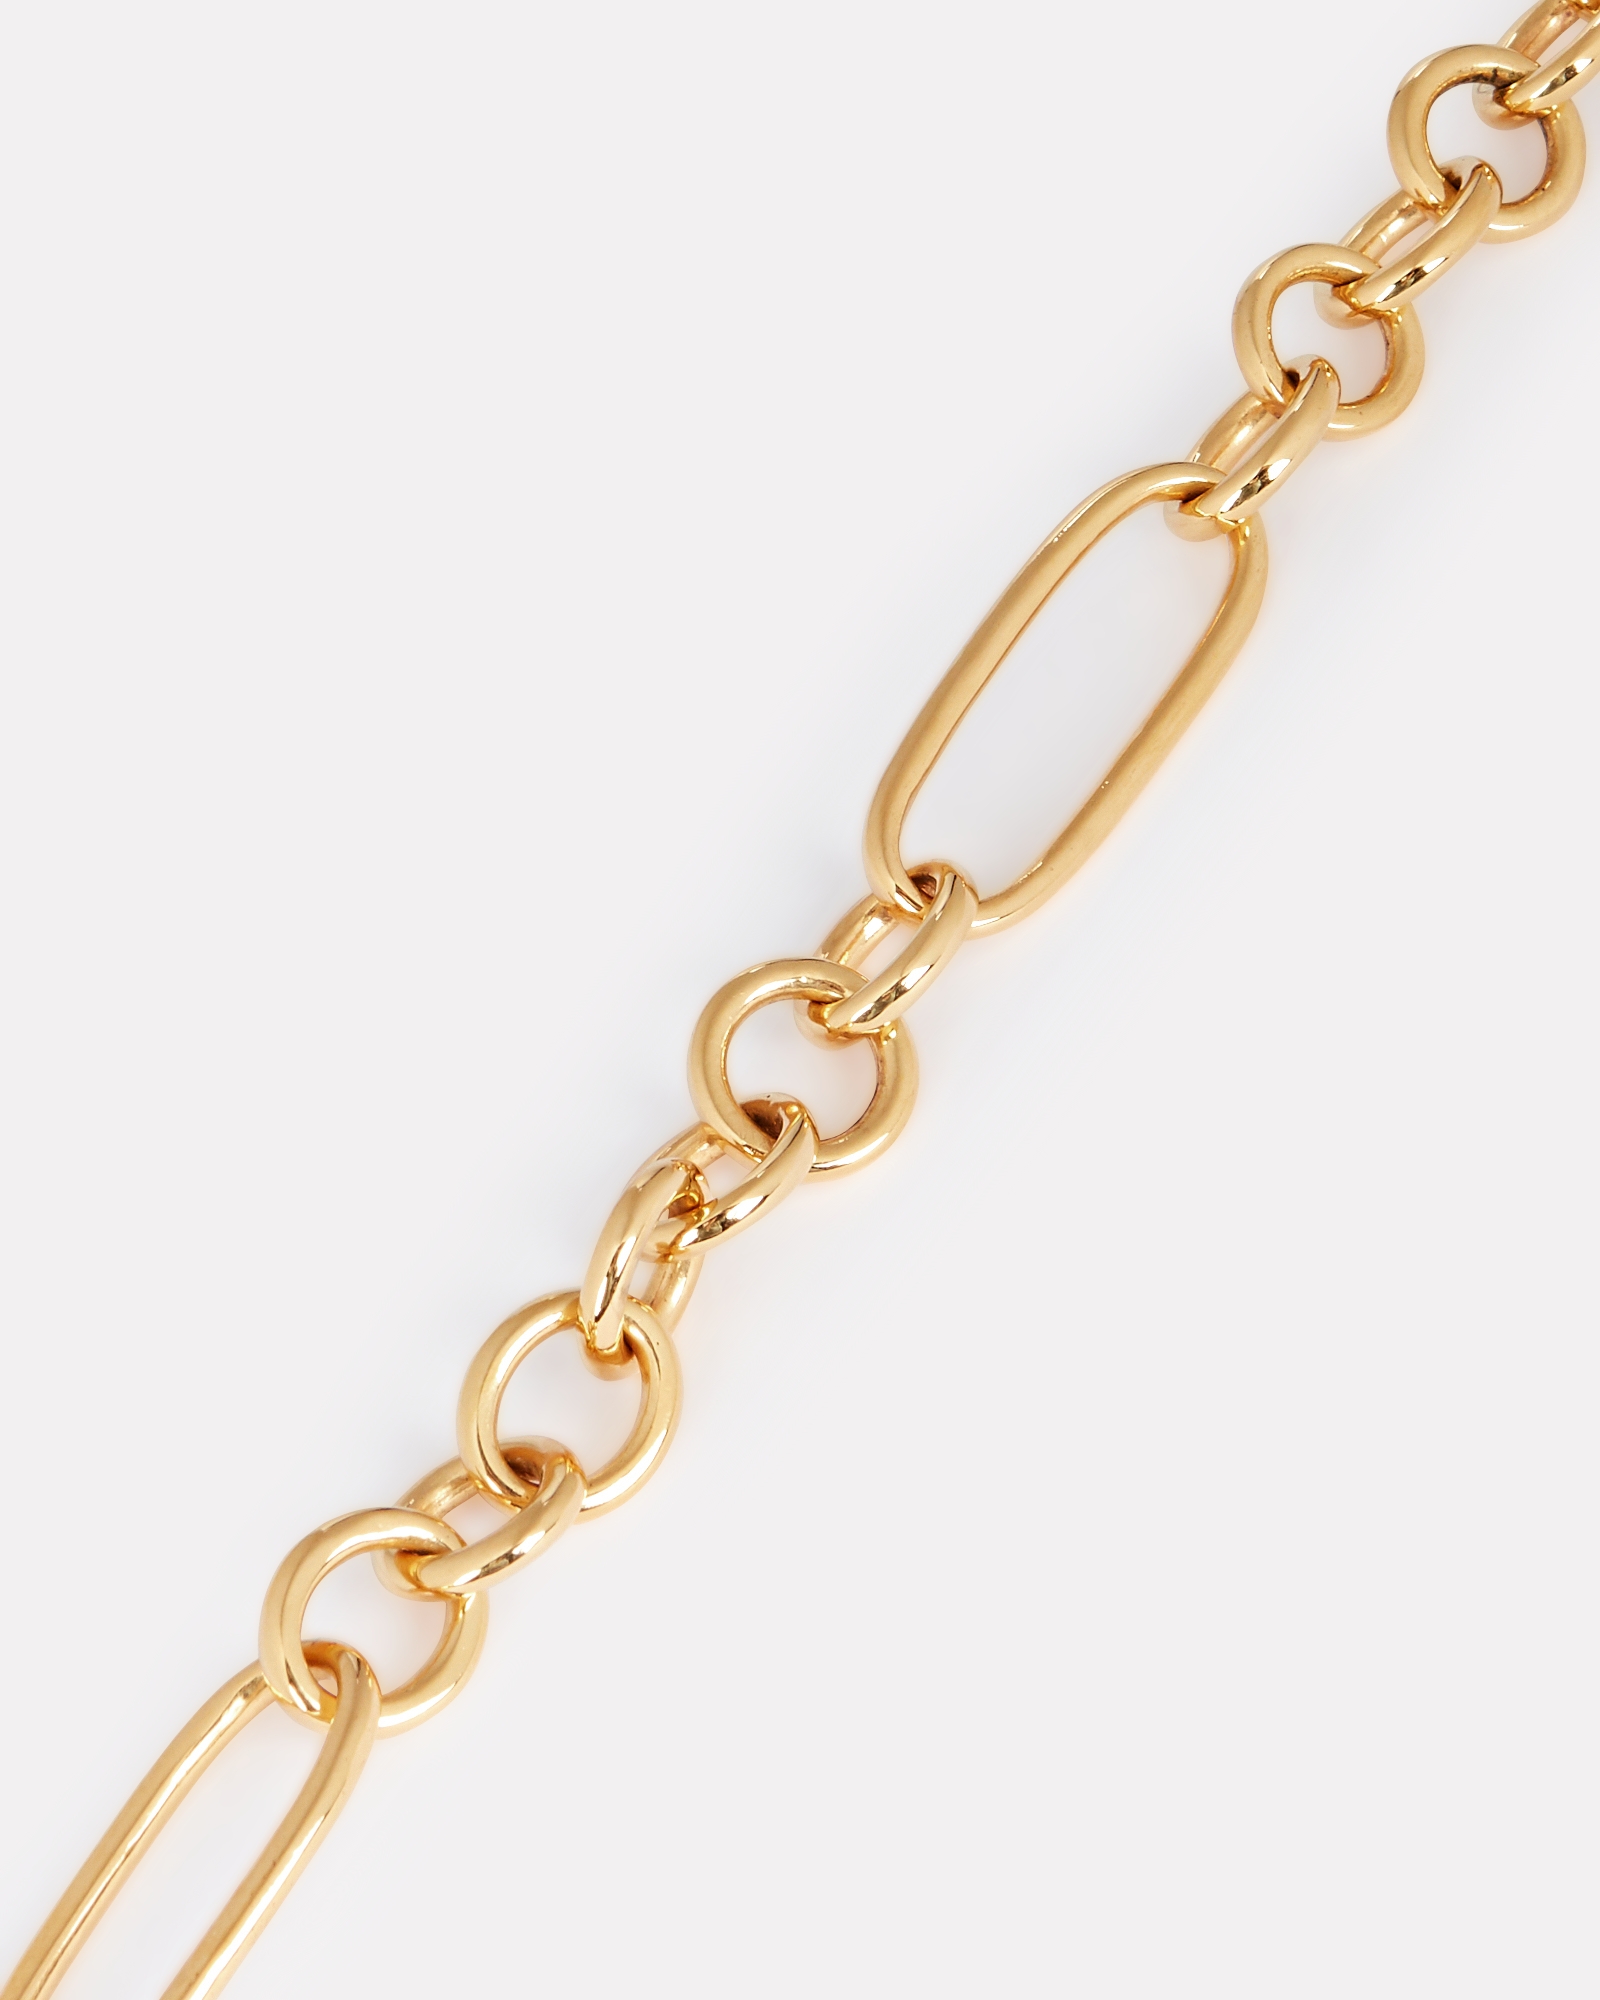 Flash Jewellery Leisure Chain-Link Necklace | INTERMIX®